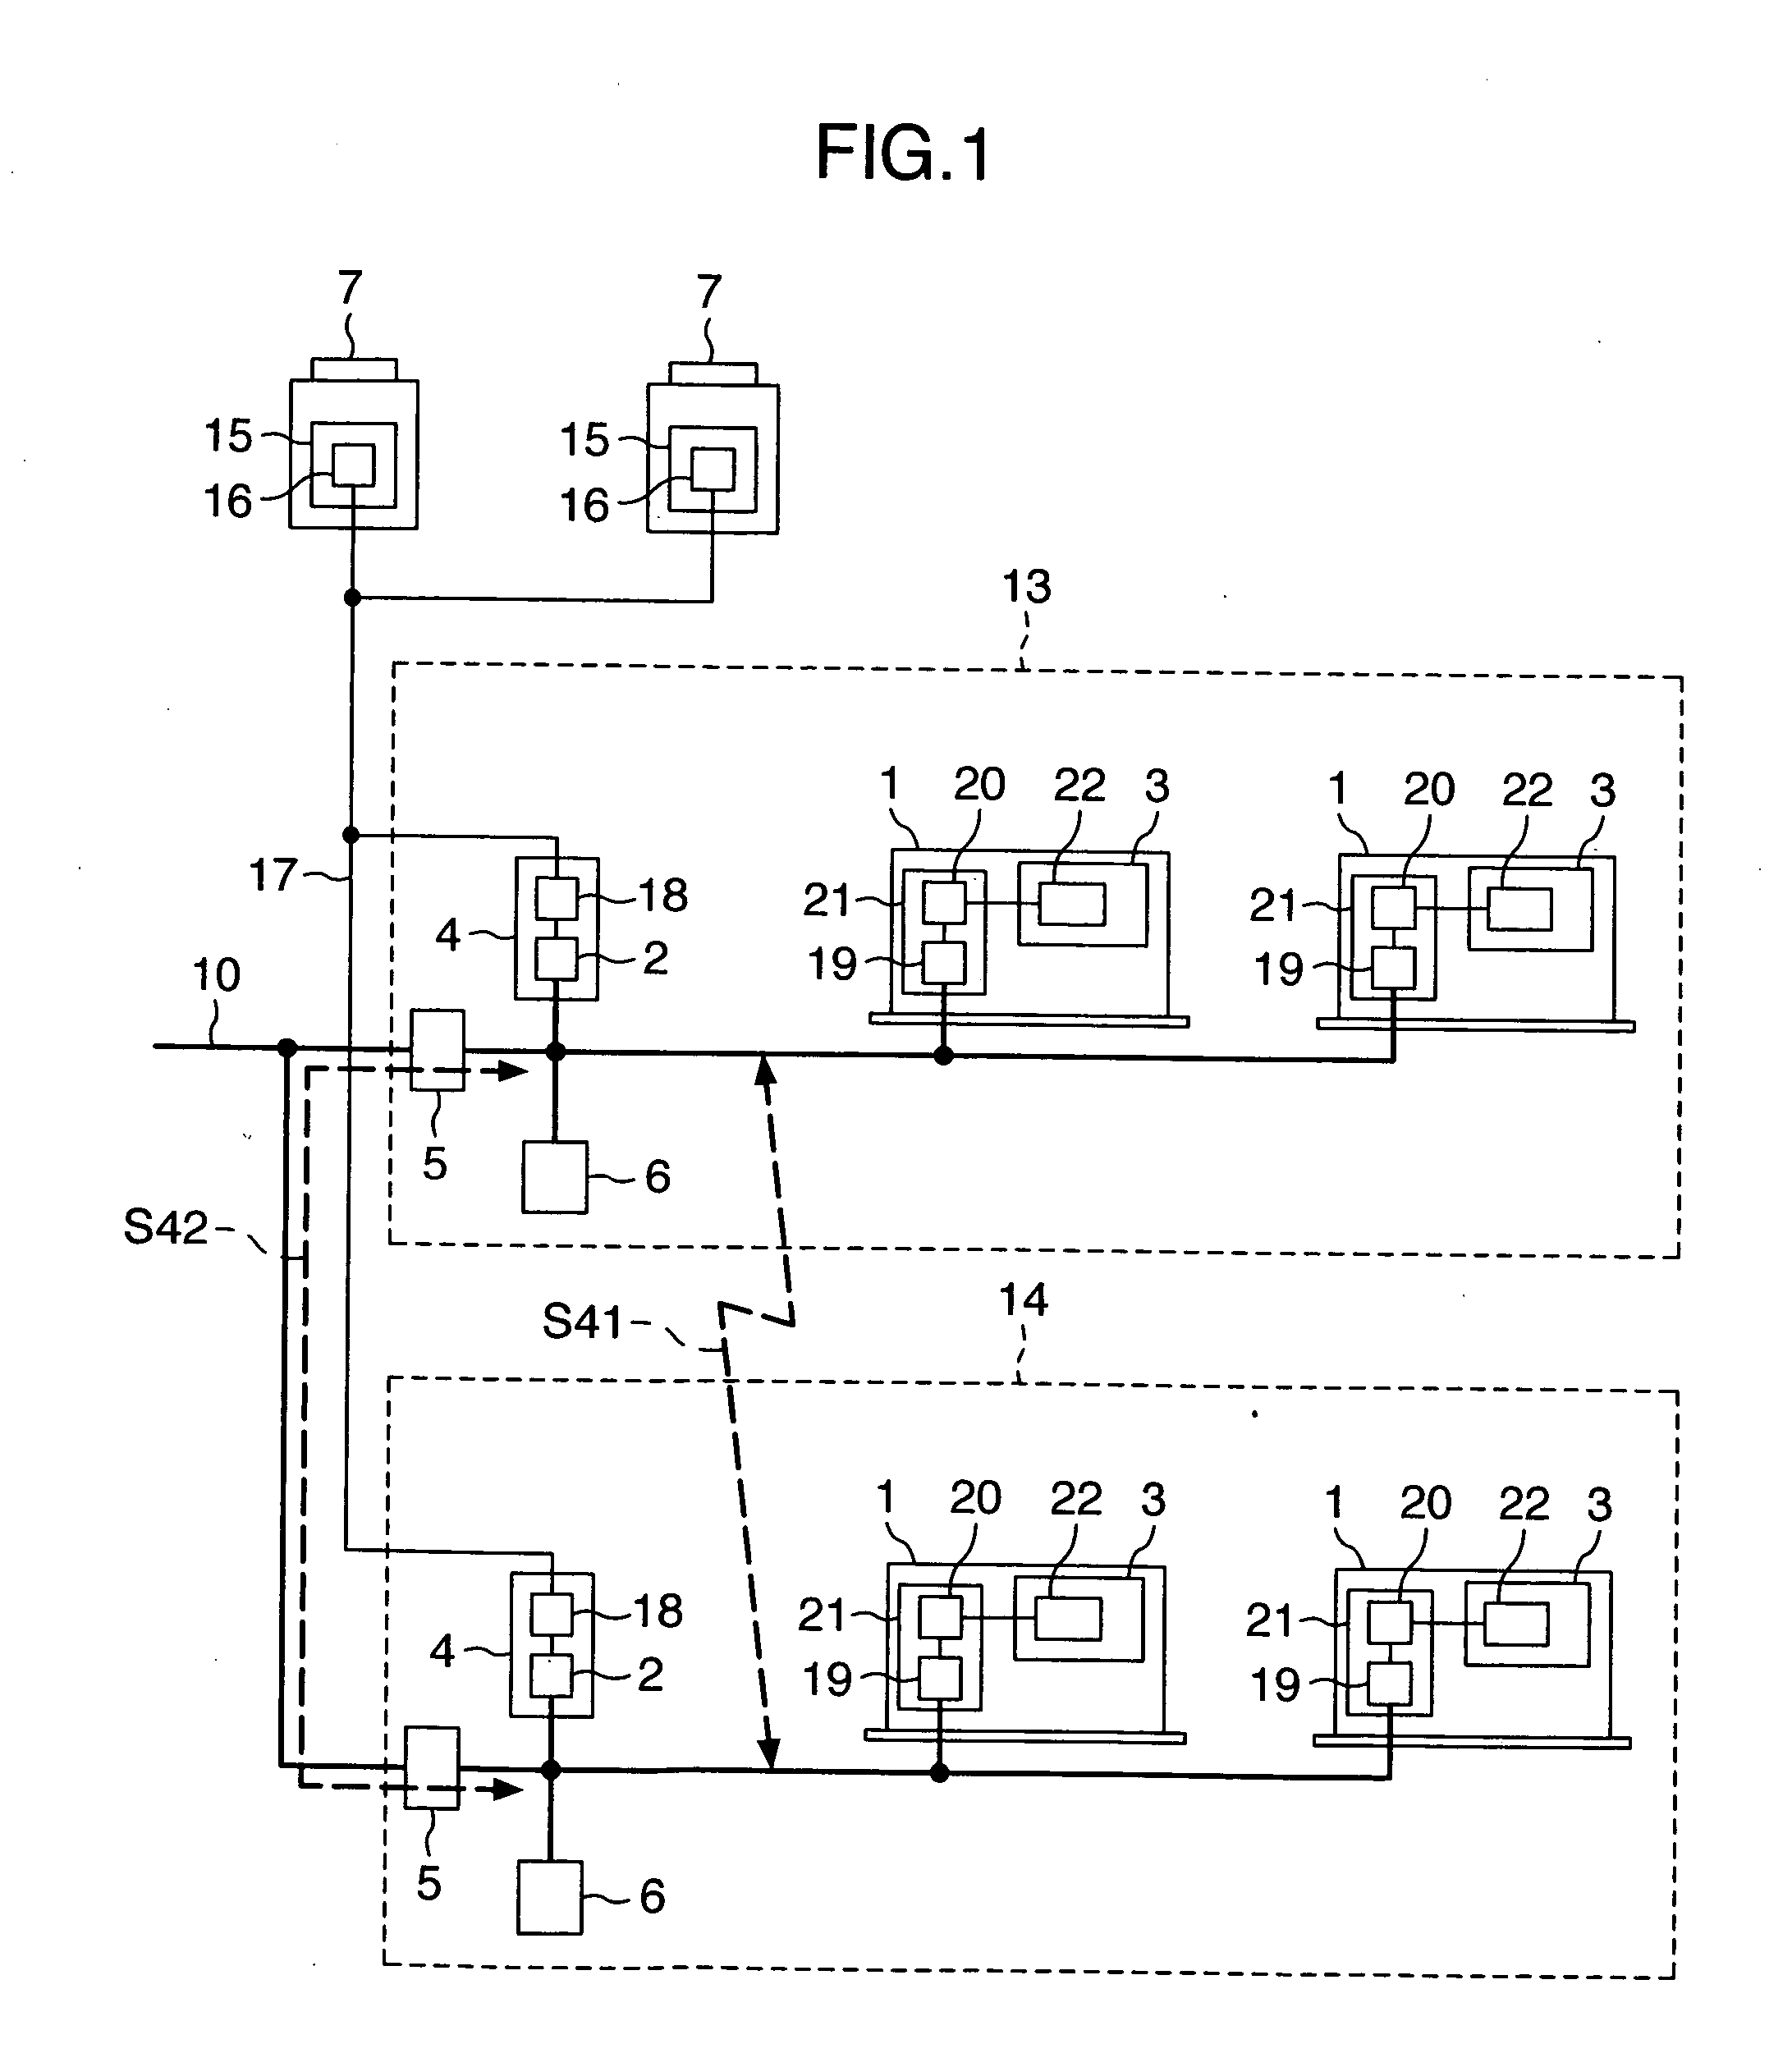 Air conditioner and power line communication system